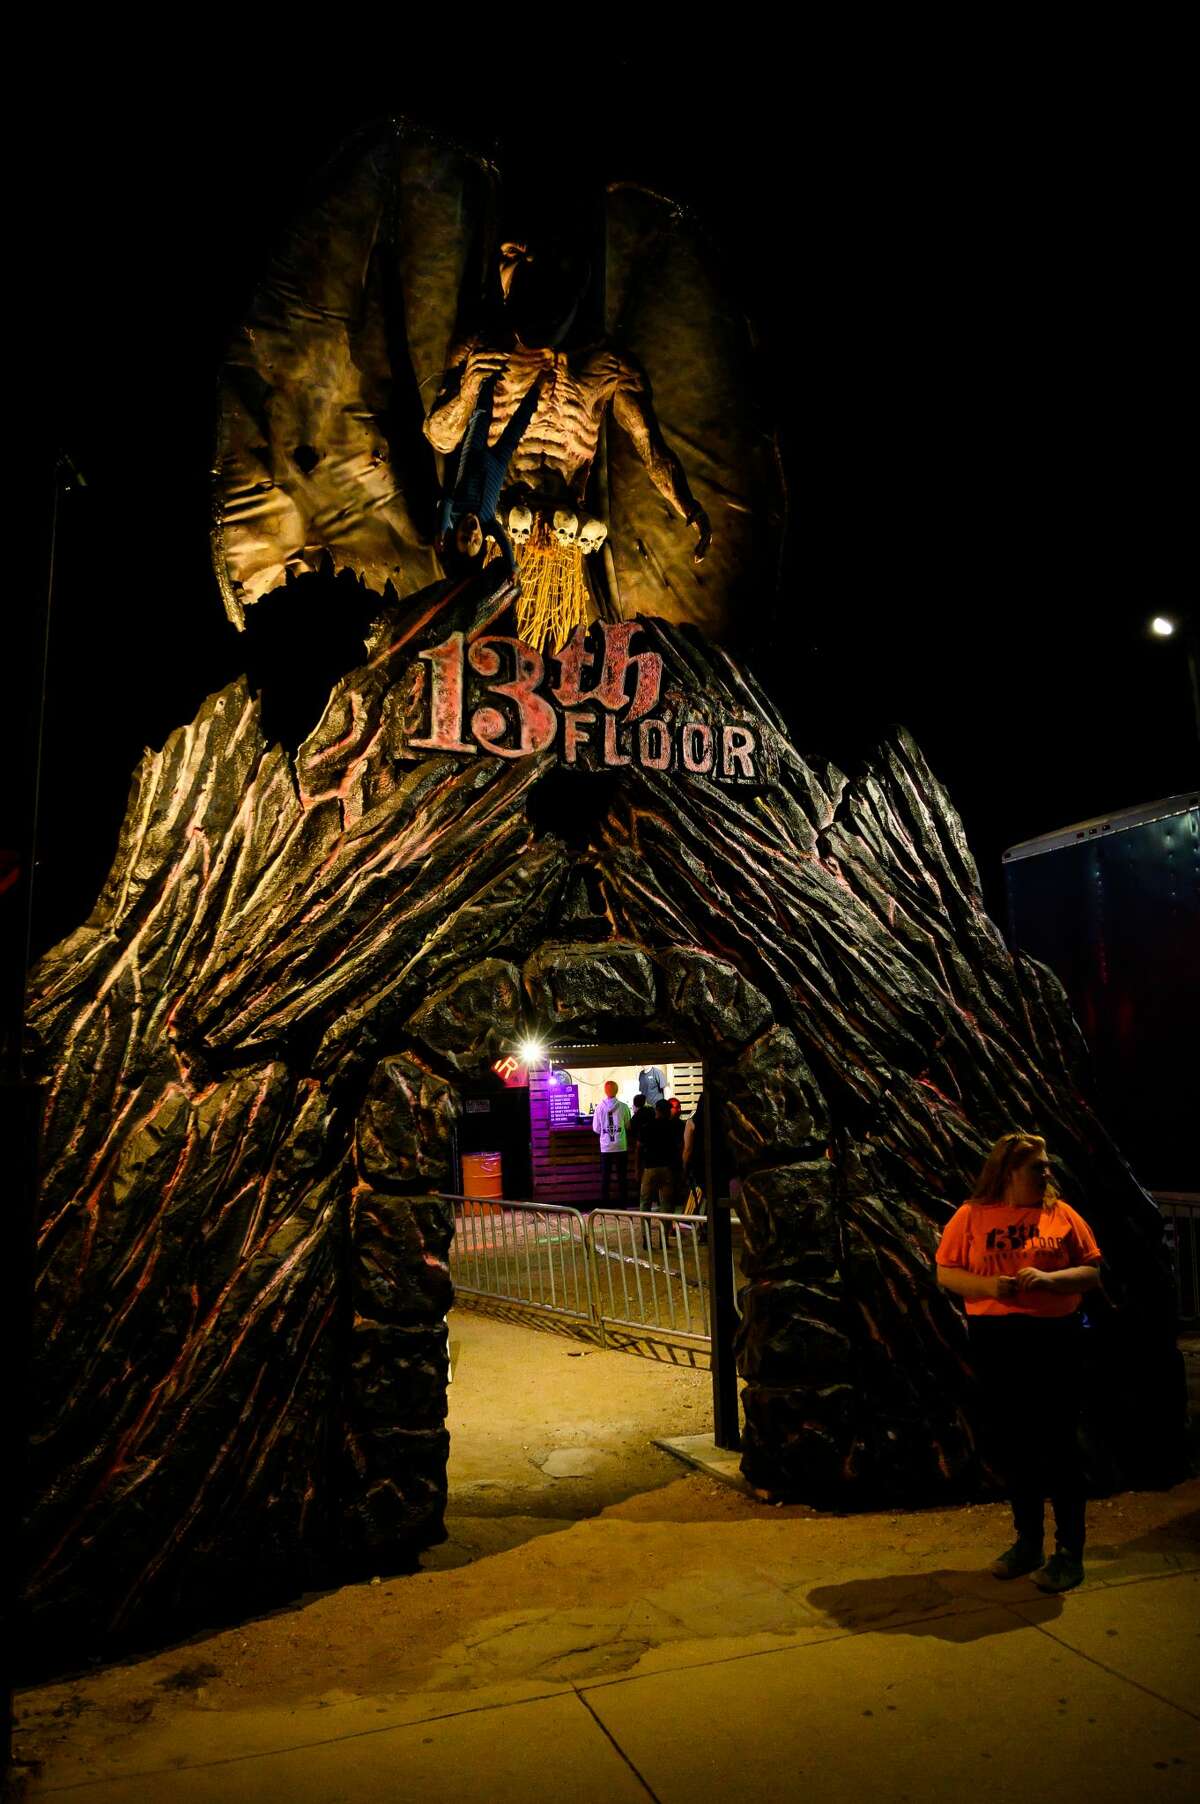 Enter If You Dare 13th Floor Haunted House Offers Frightening Challenge To Close Out Spooky Season